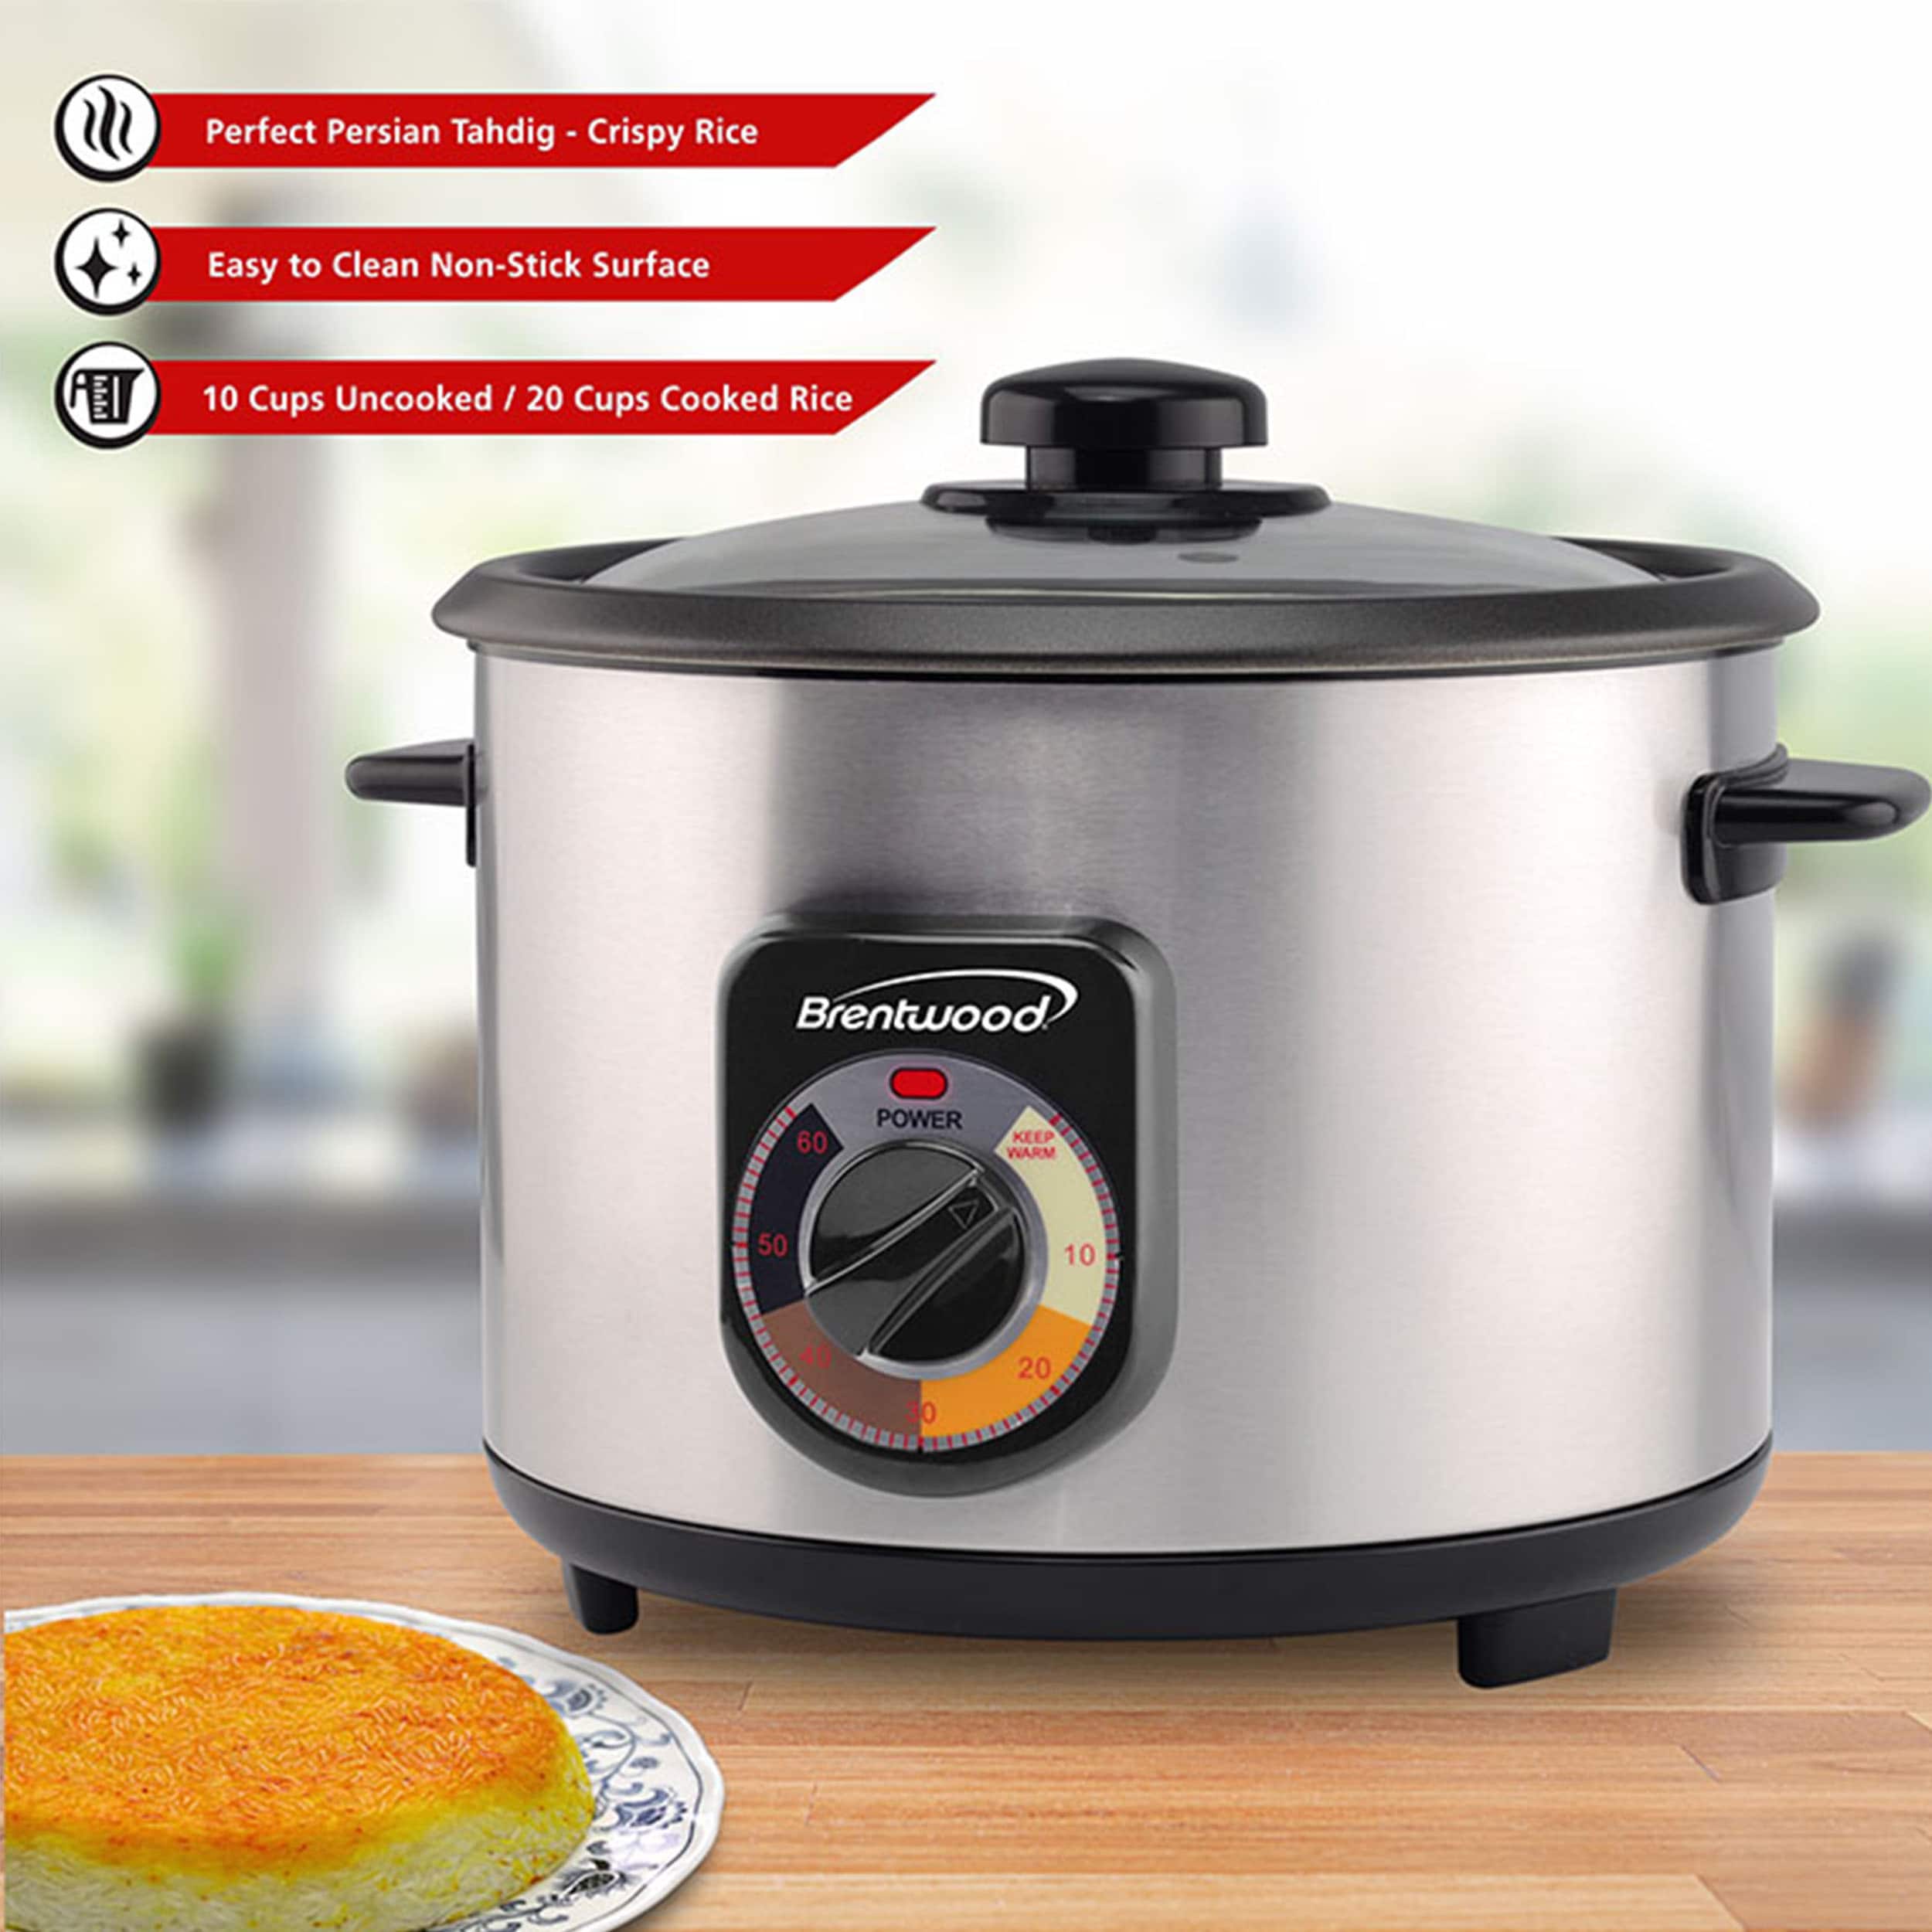 Brentwood 4 Cup Rice Cooker Steamer